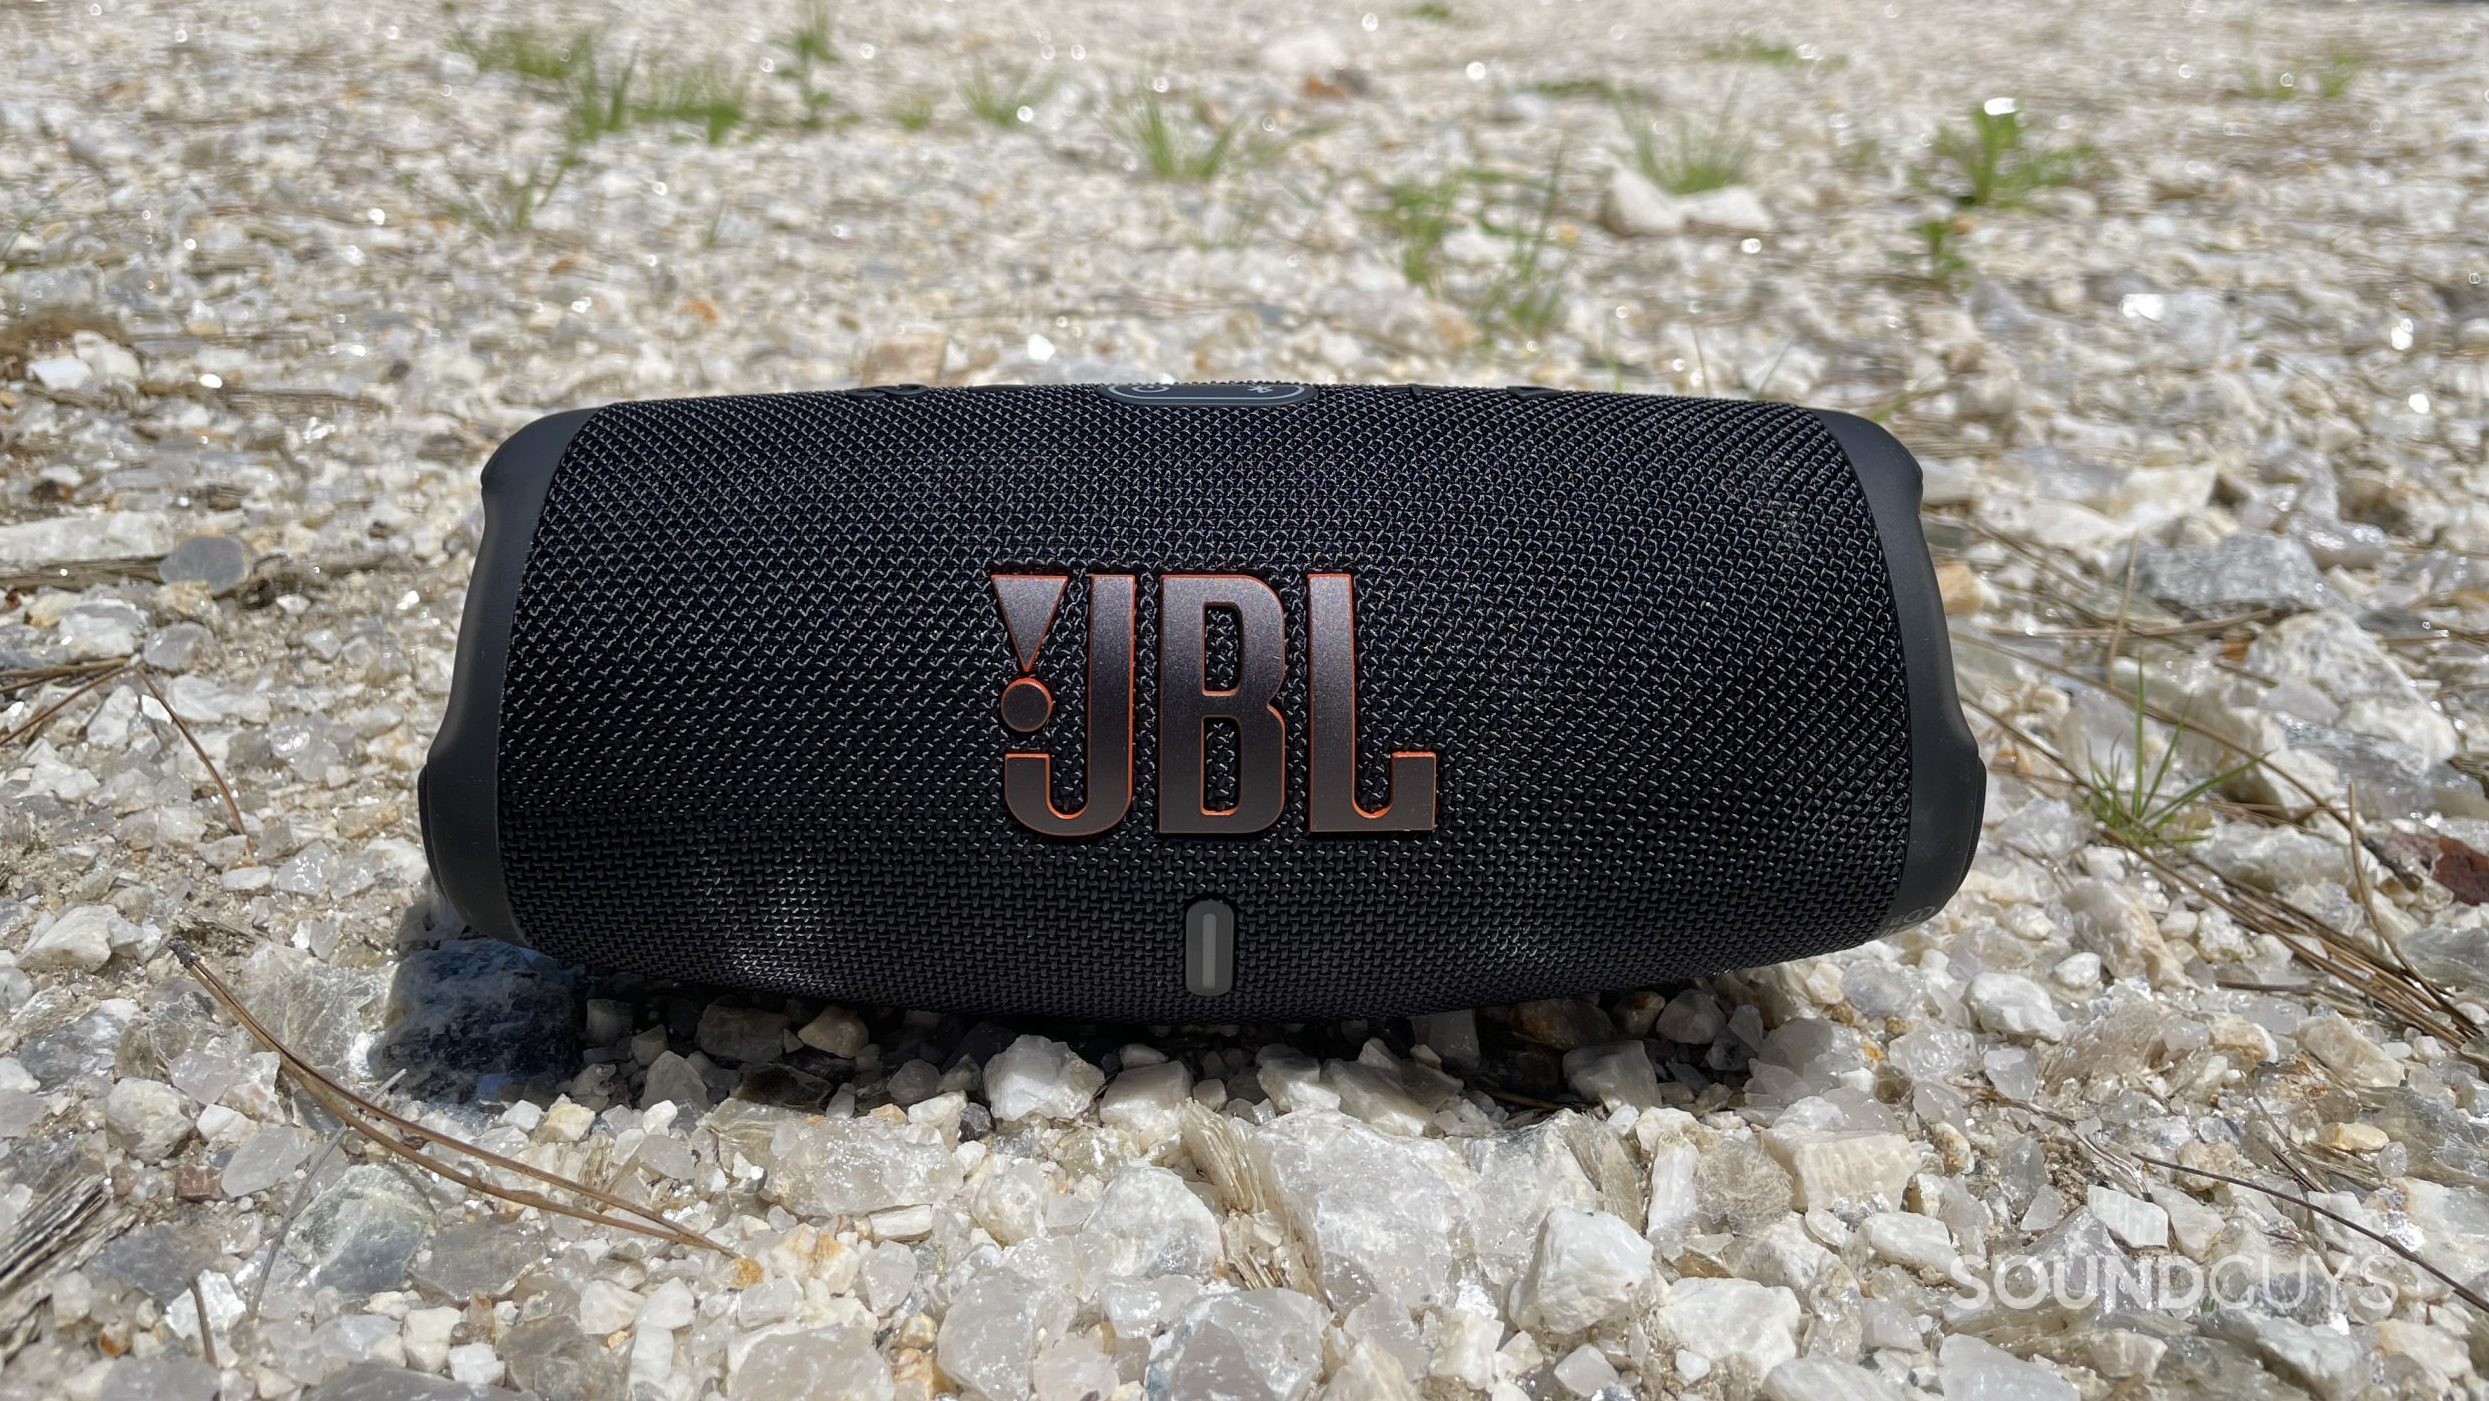 The best Bluetooth speaker you can buy just got a massive price drop